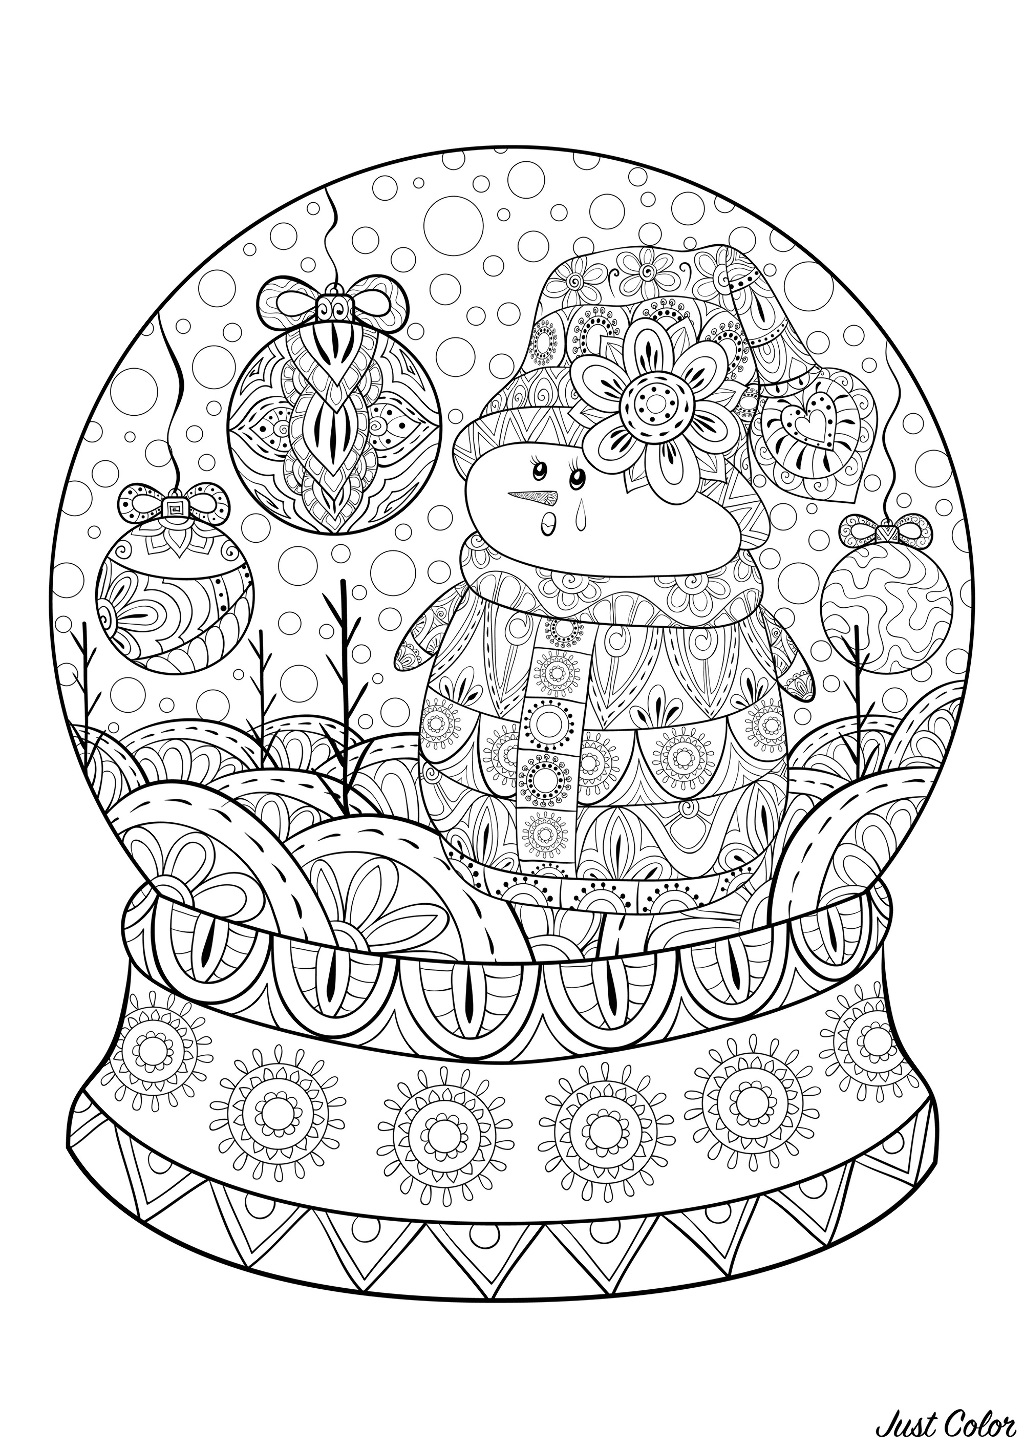 A Christmas snow globe featuring a snowman and Christmas decoration balls